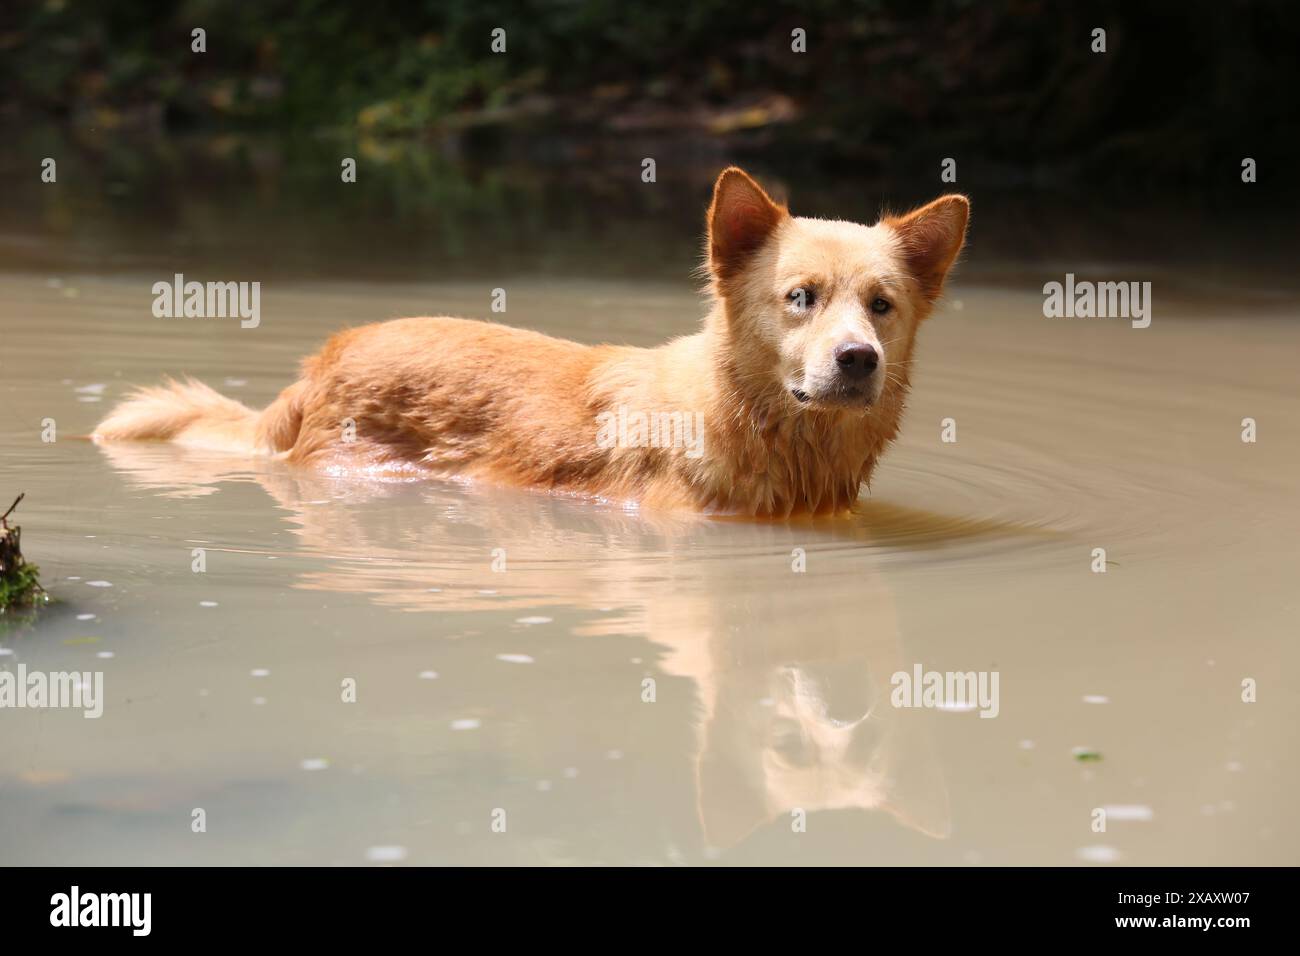 Philippine local breed Askal dog cooling off in river, extreme heat wave in Philippines & Southeast Asia, Stock Photo